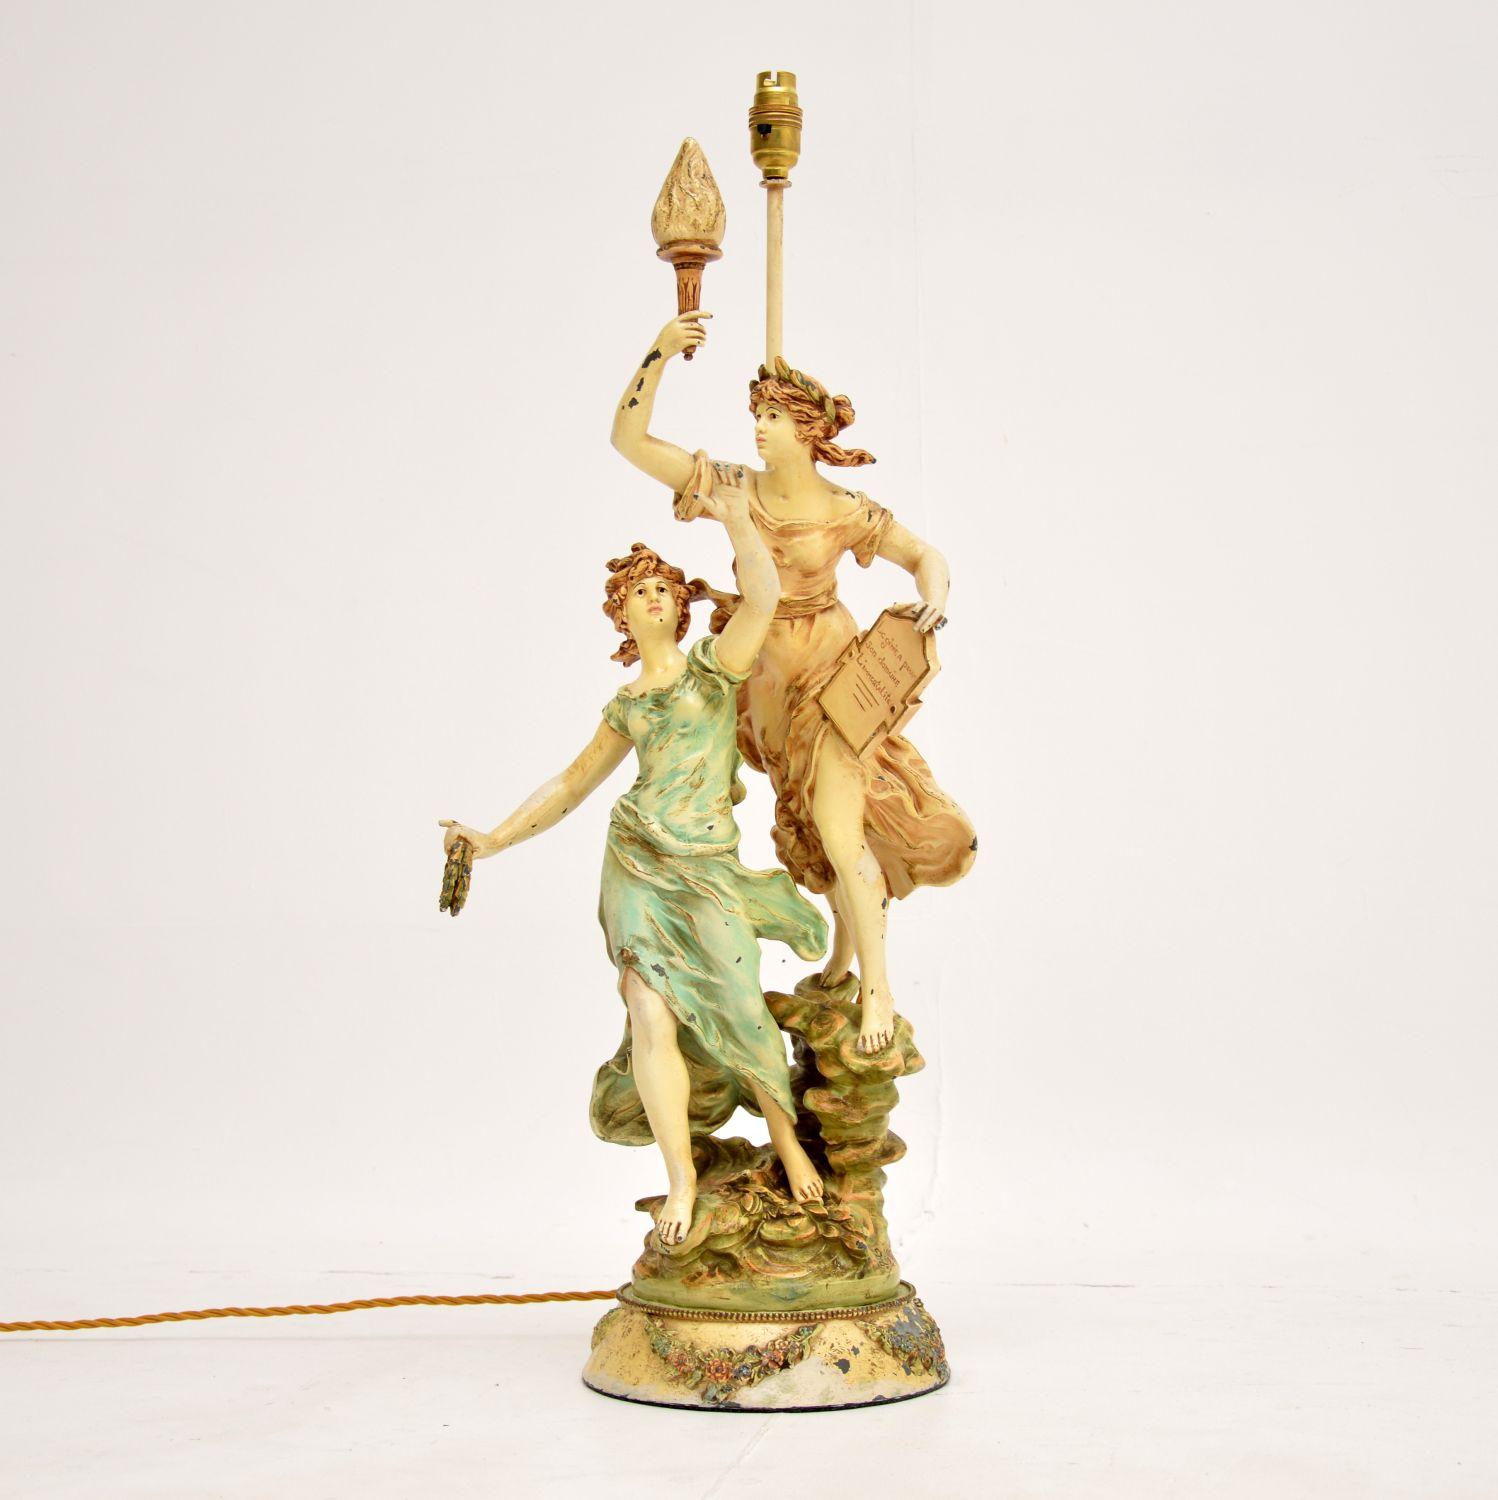 A stunning antique Art Nouveau period table lamp in painted cast spelter. This design is by L & F Moreau, it dates from around the 1900-1920’s.

The quality is superb, this is beautifully designed and is a very impressive sculpture.

The condition